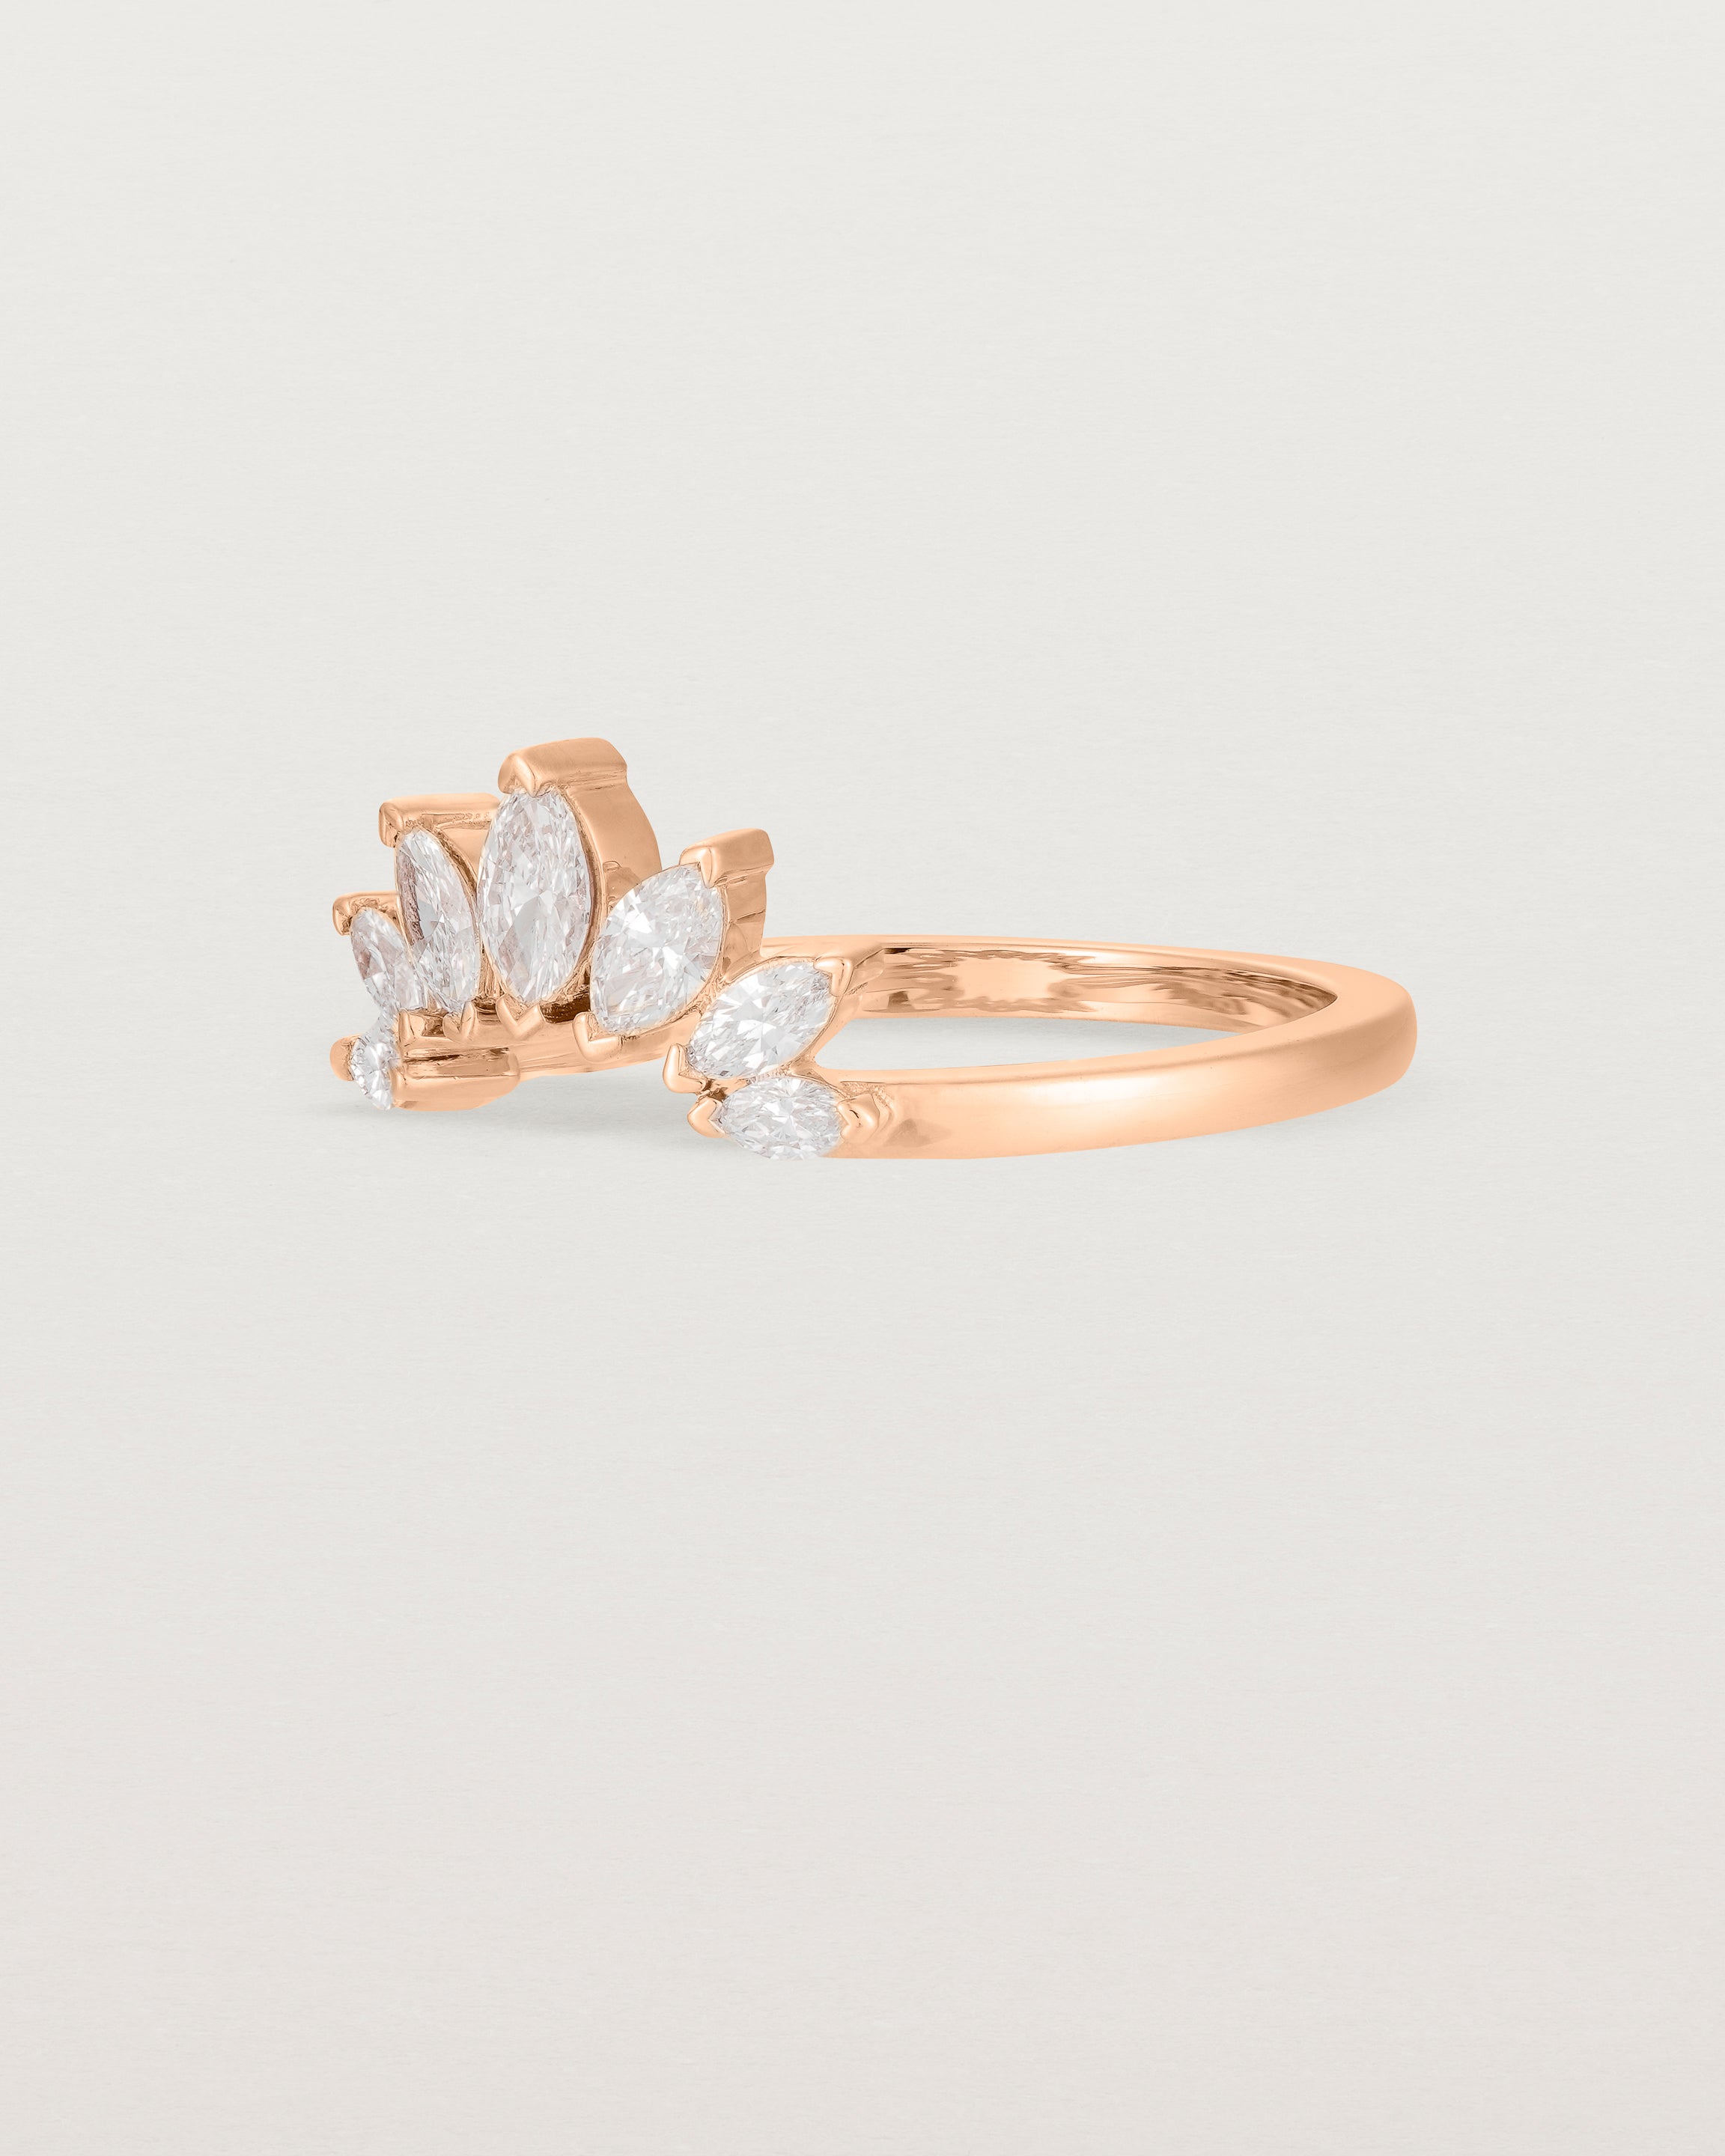 A white diamond, sun-beam inspired crown ring crafted in rose gold